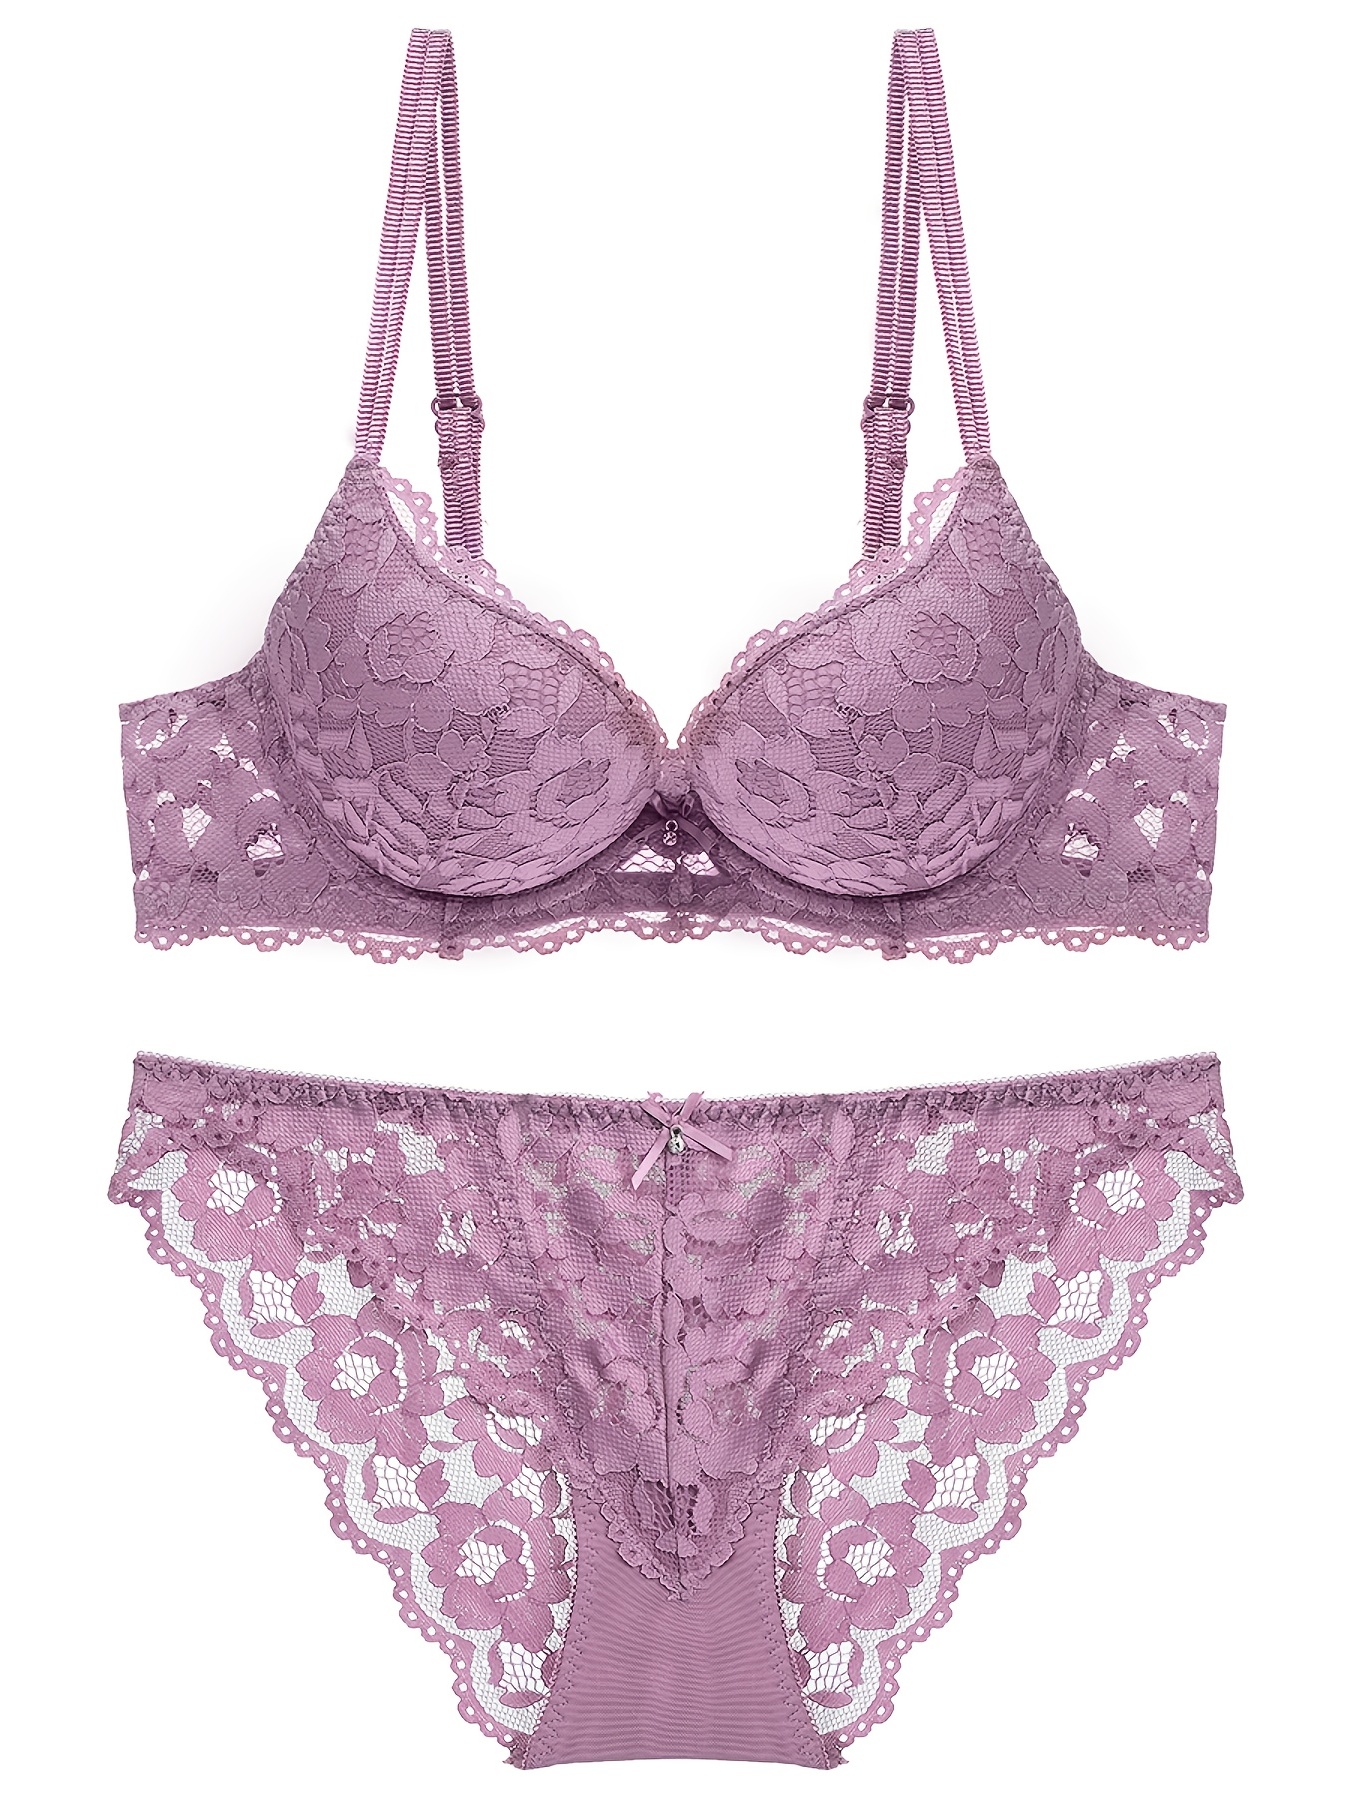 Embroidered Lace Pink Lace Bra Set For Women Push Up Underwear